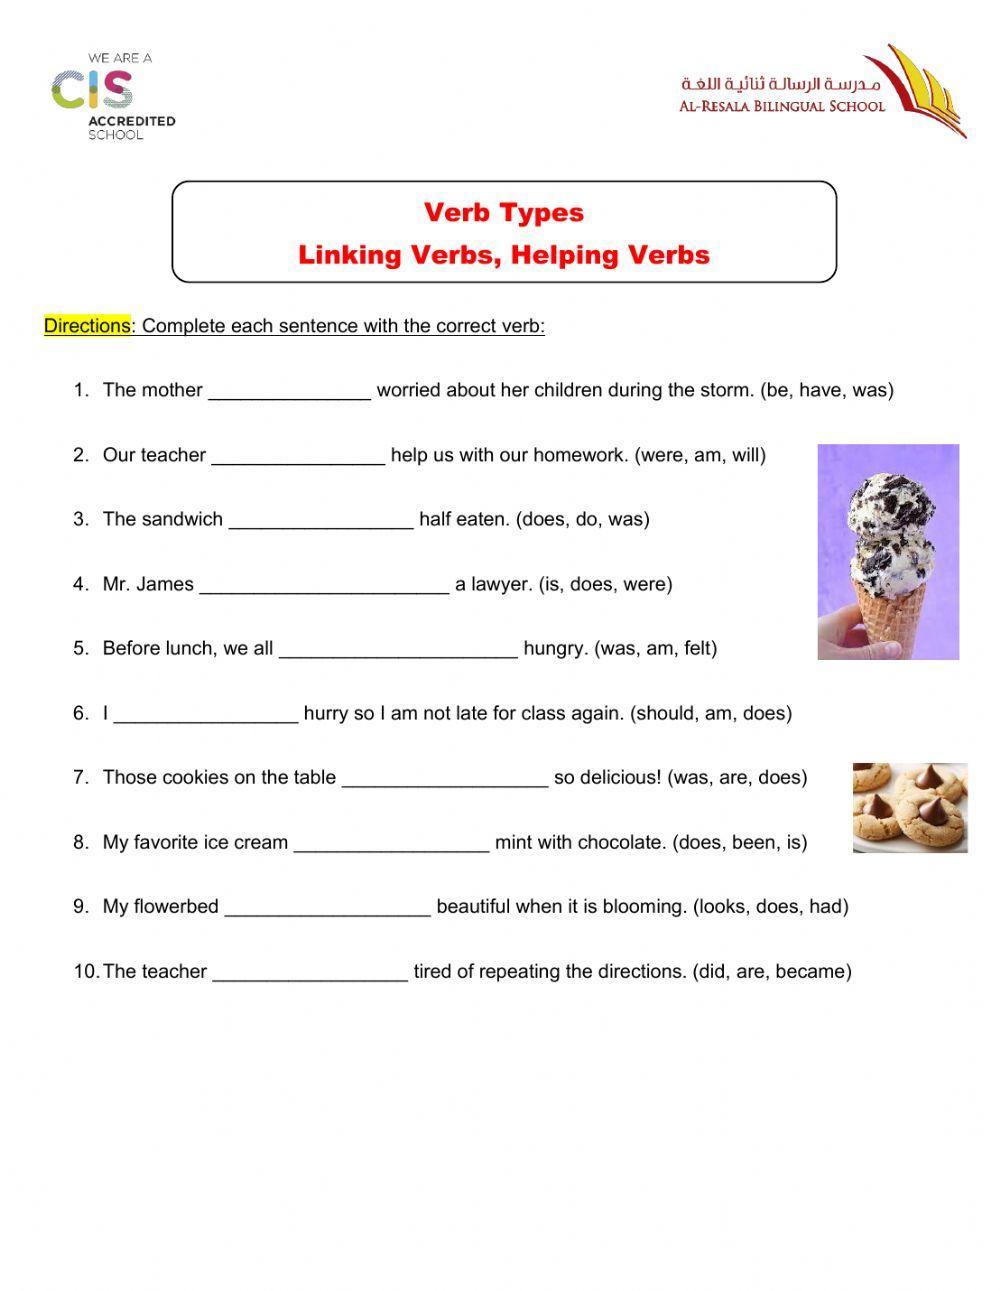 Helping and Linking Verbs